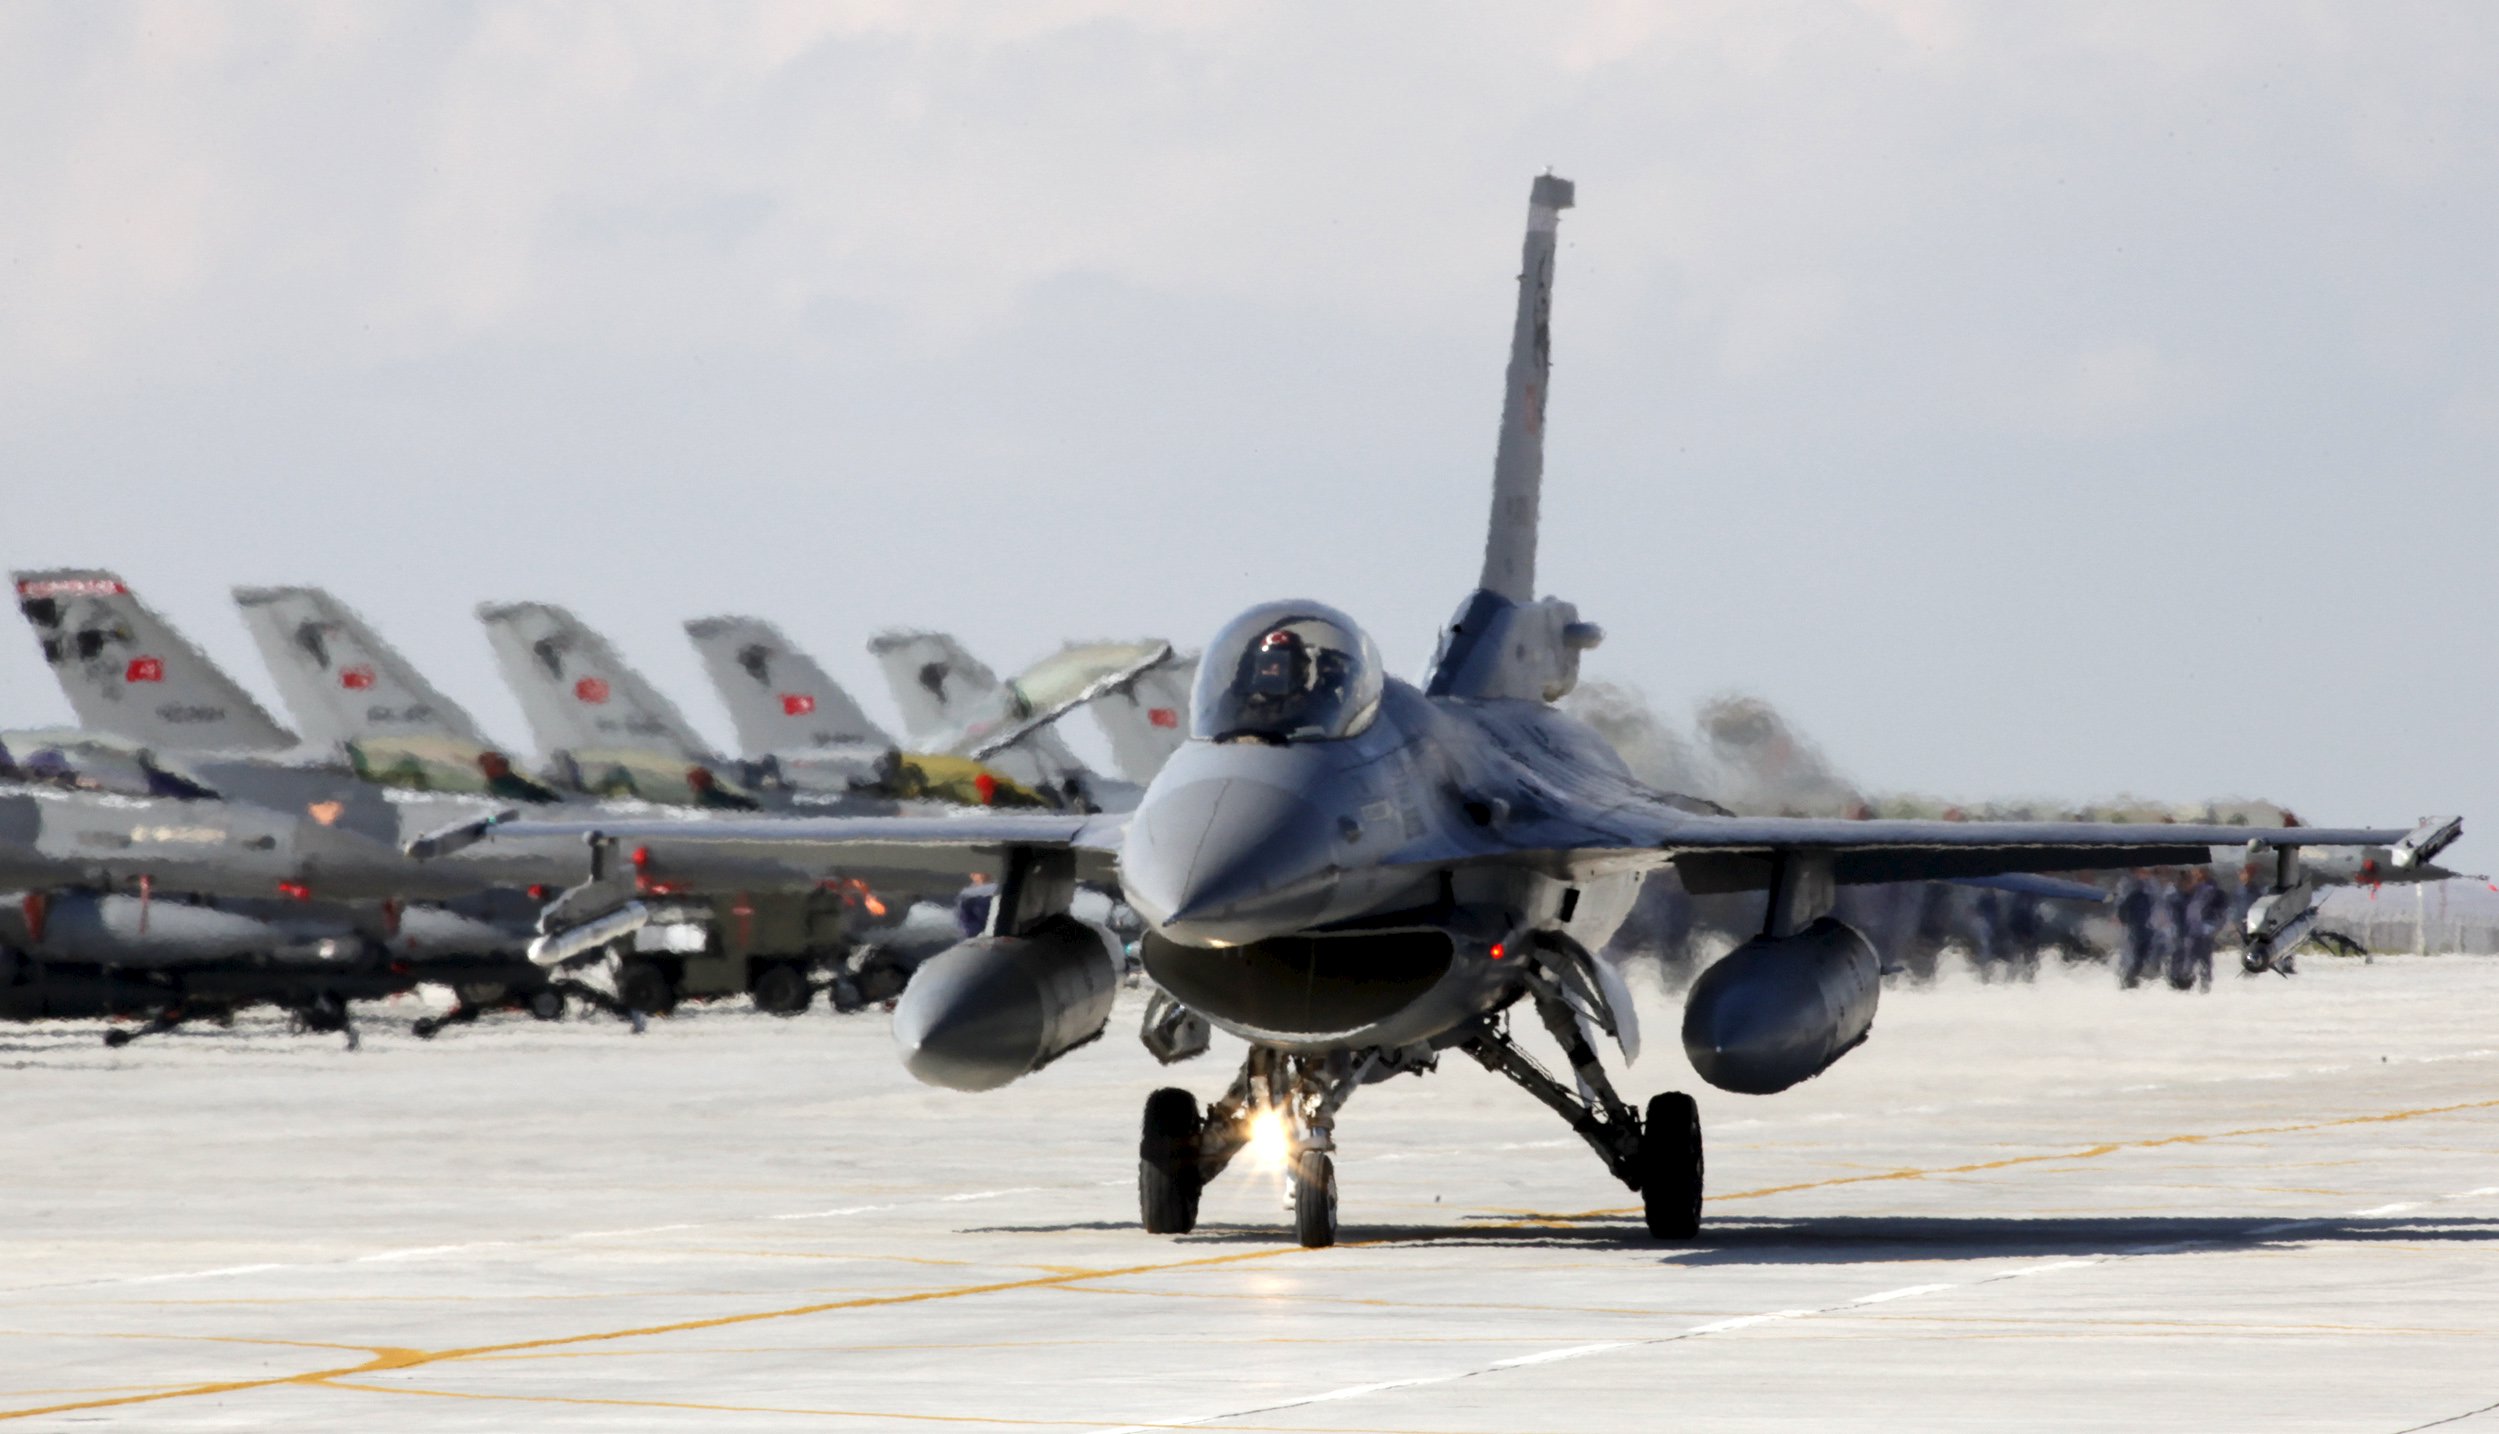 A Turkish Air Force F16 jet fighter prepares to take off from an air base during the Anatolian Eagle military exercise in the central Anatolian city of Konya, in this April 28, 2010 file picture. Turkish F-16 fighter jets shot down a war plane of unknown origin on November 24, 2015 after it violated Turkish air space close to the Syrian border and ignored warnings, a Turkish military official told Reuters. REUTERS/Umit Bektas